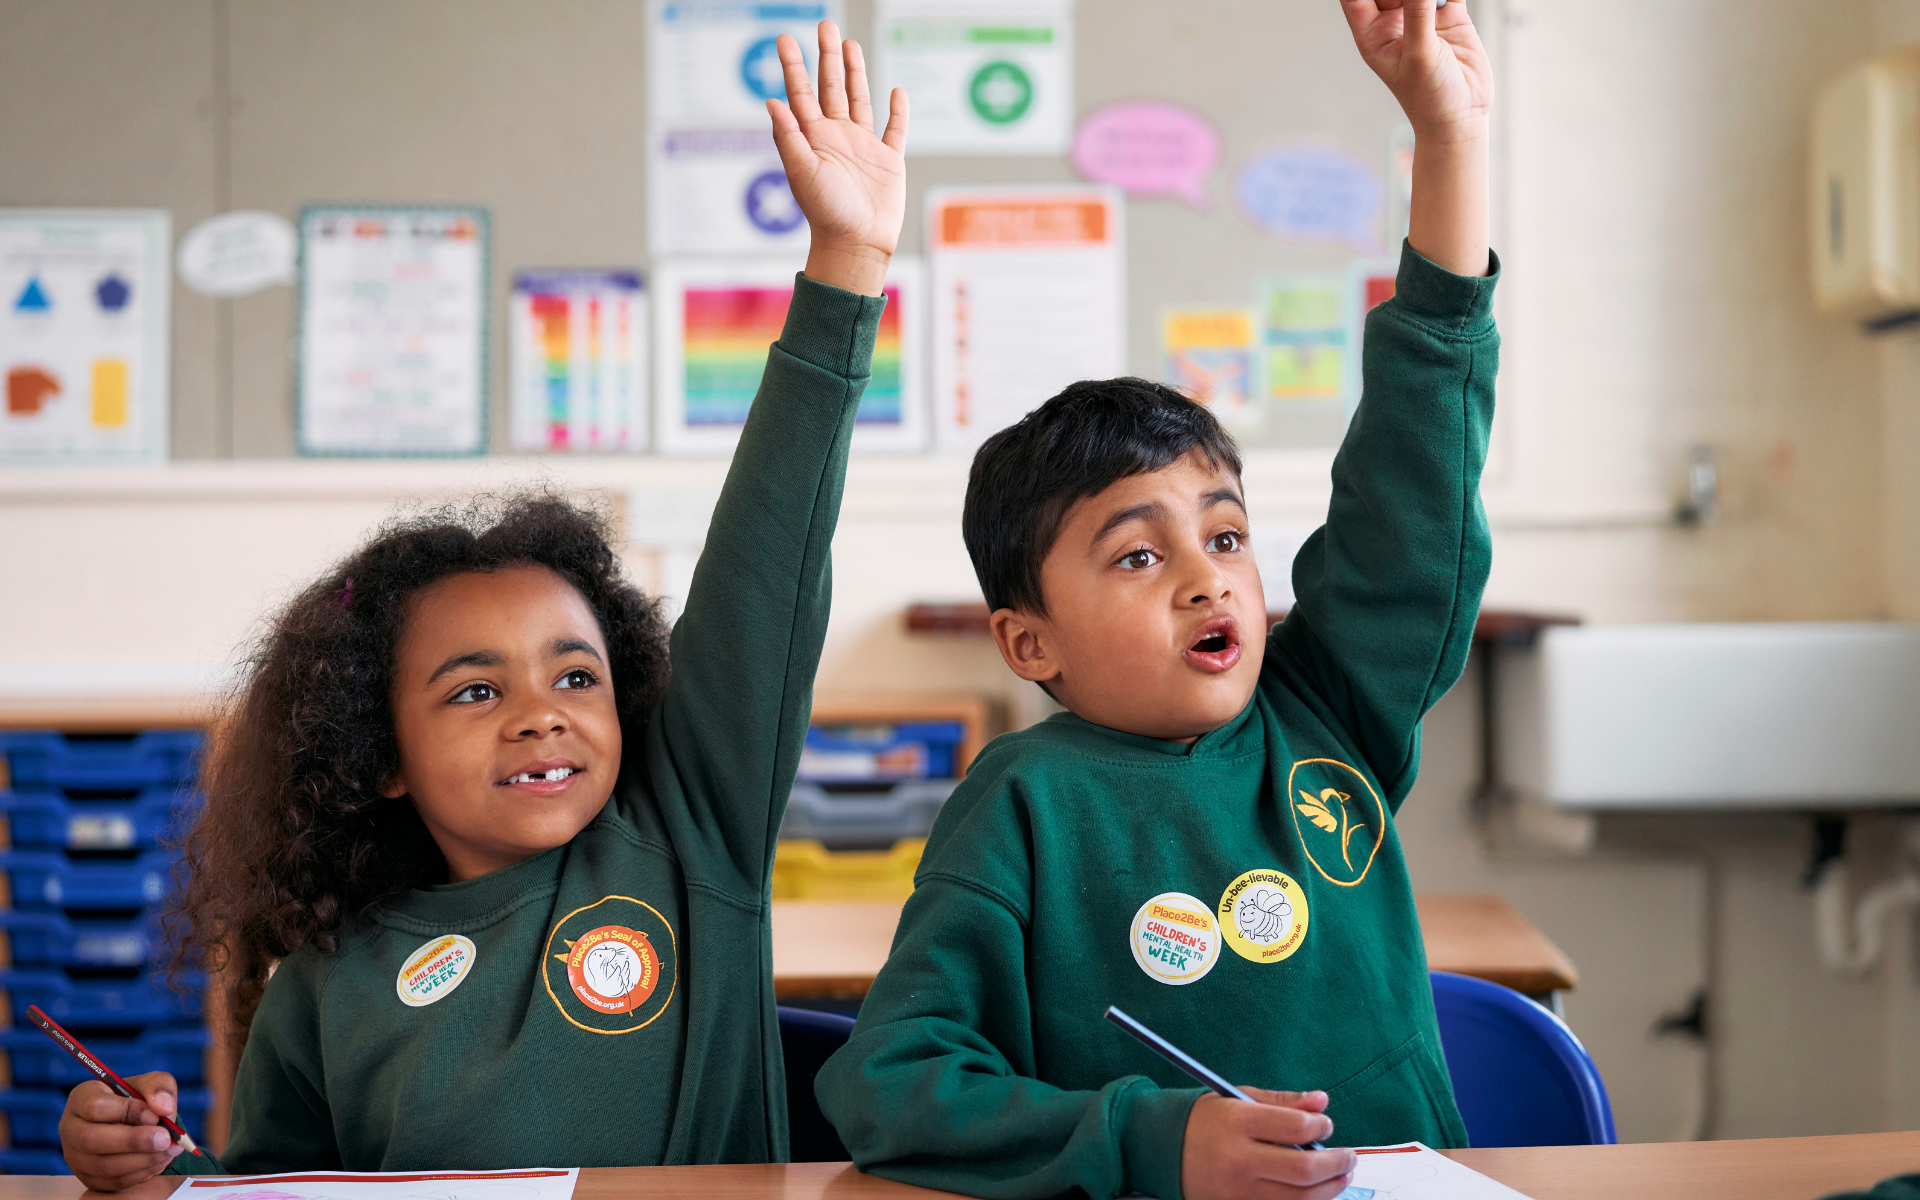 Two primary age children wearing school uniform, sat in a classroom with their hands raised. Both are wearing stickers with the Children's Mental Health Week logo on.